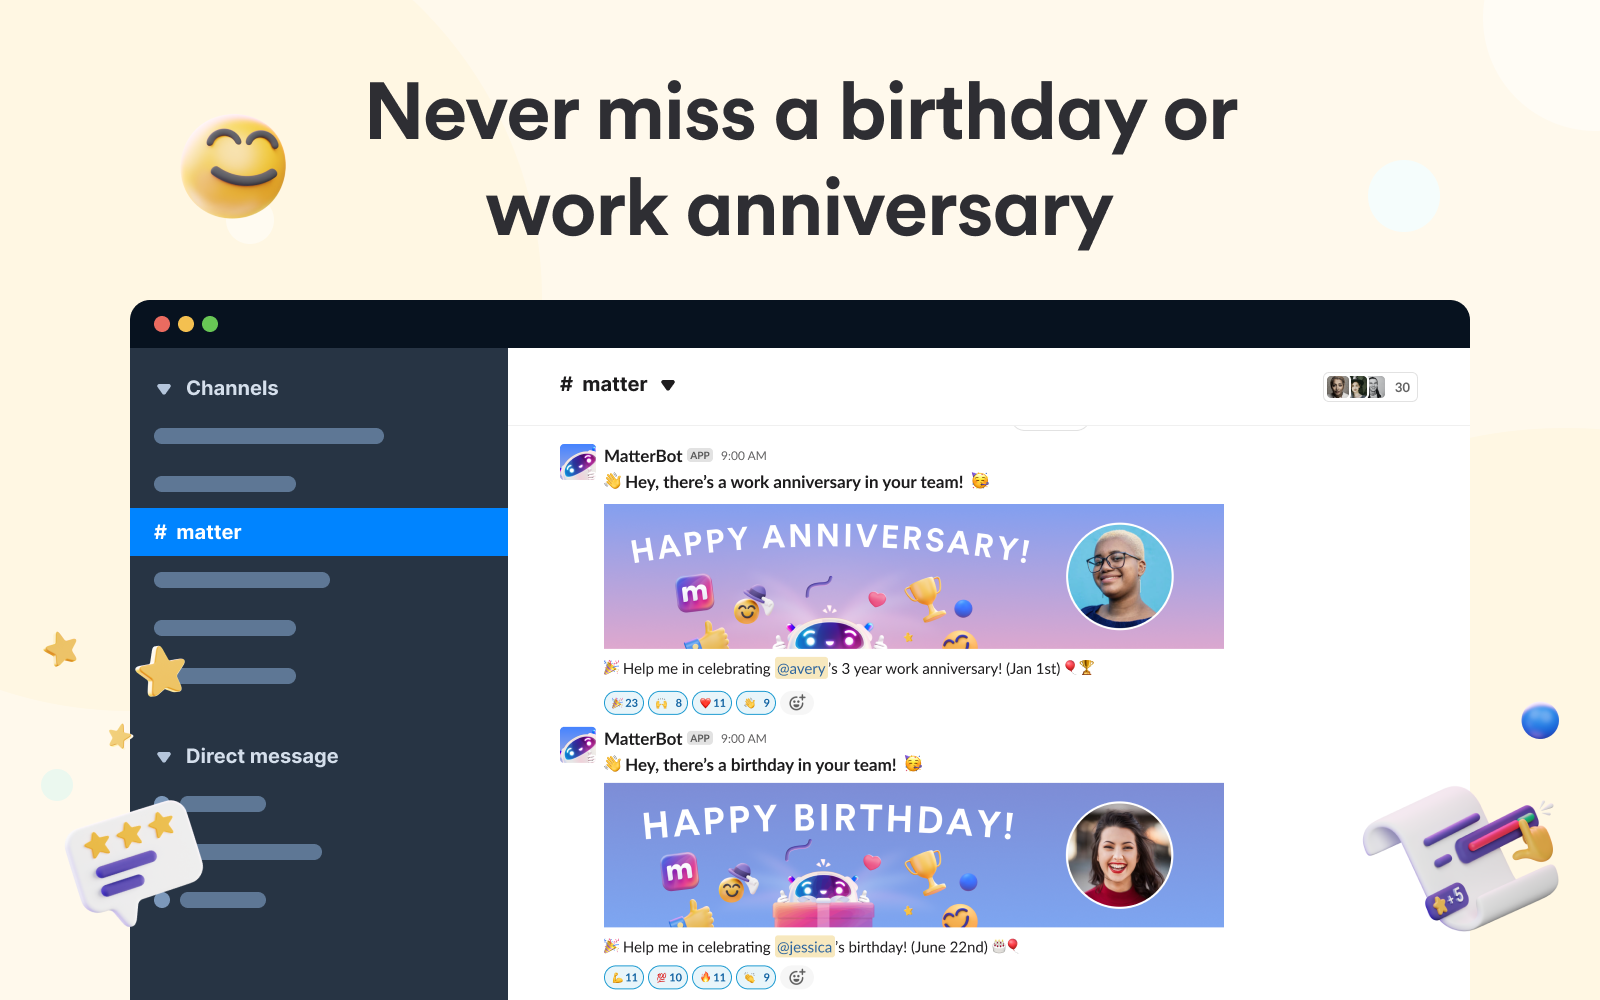 Never miss a Celebration! — Automatically send birthday and work anniversary messages with/without rewards for everyone to see and celebrate!